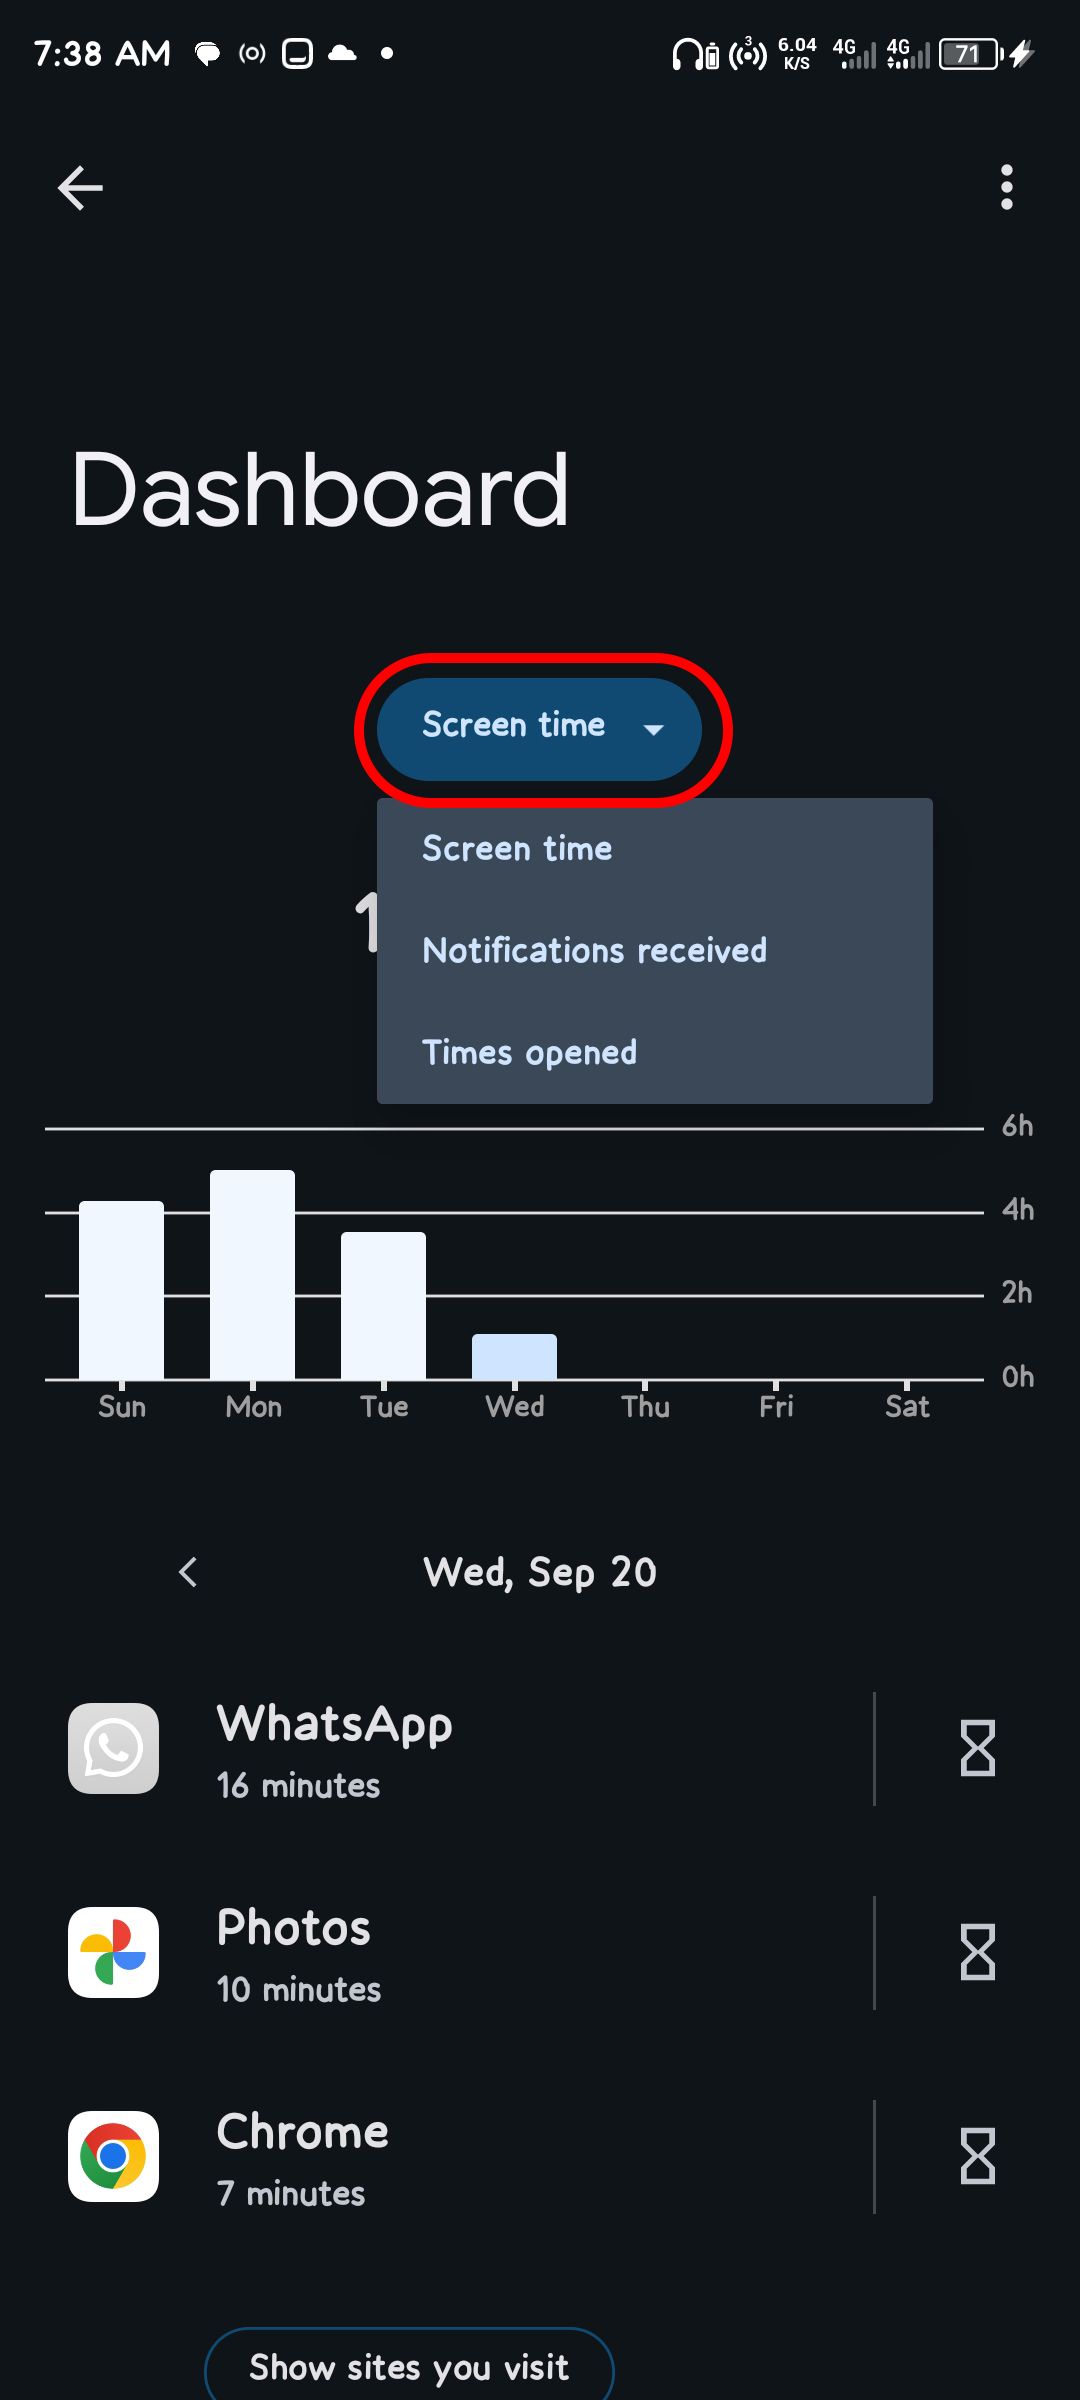 Switching between Screen time, Notifications received and Times opened in Digital Wellbeing Dashboard